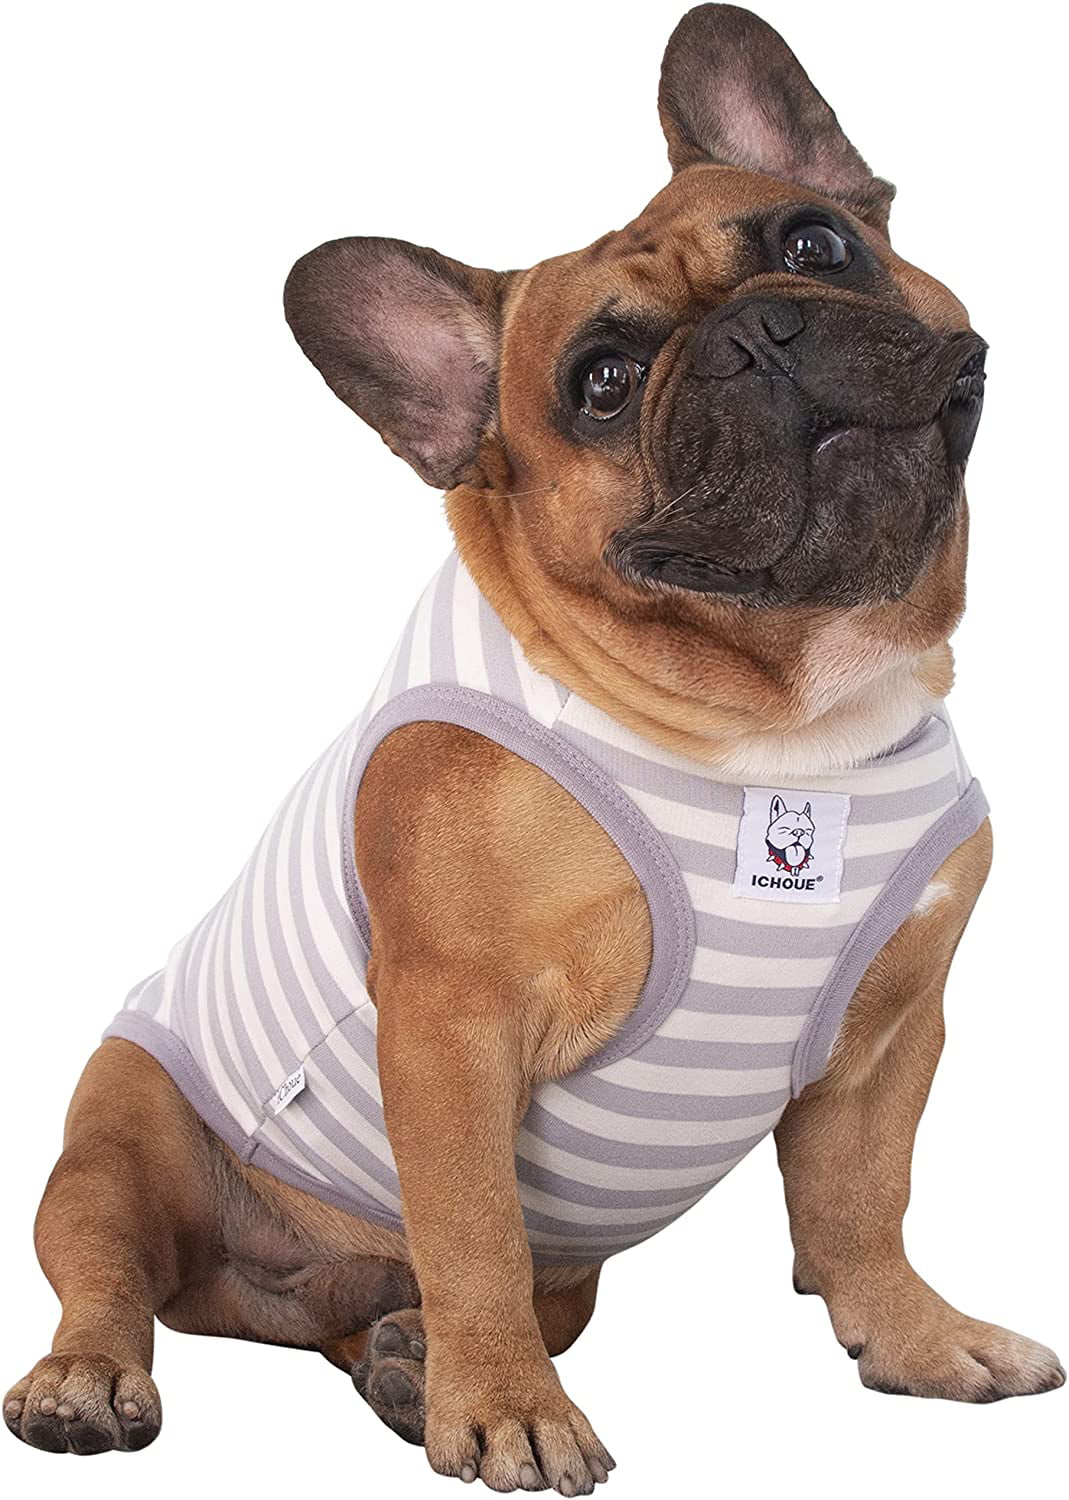 iChoue 100% Cotton Striped Dog Shirts Tank Top Vest Clothes for Medium Dogs 